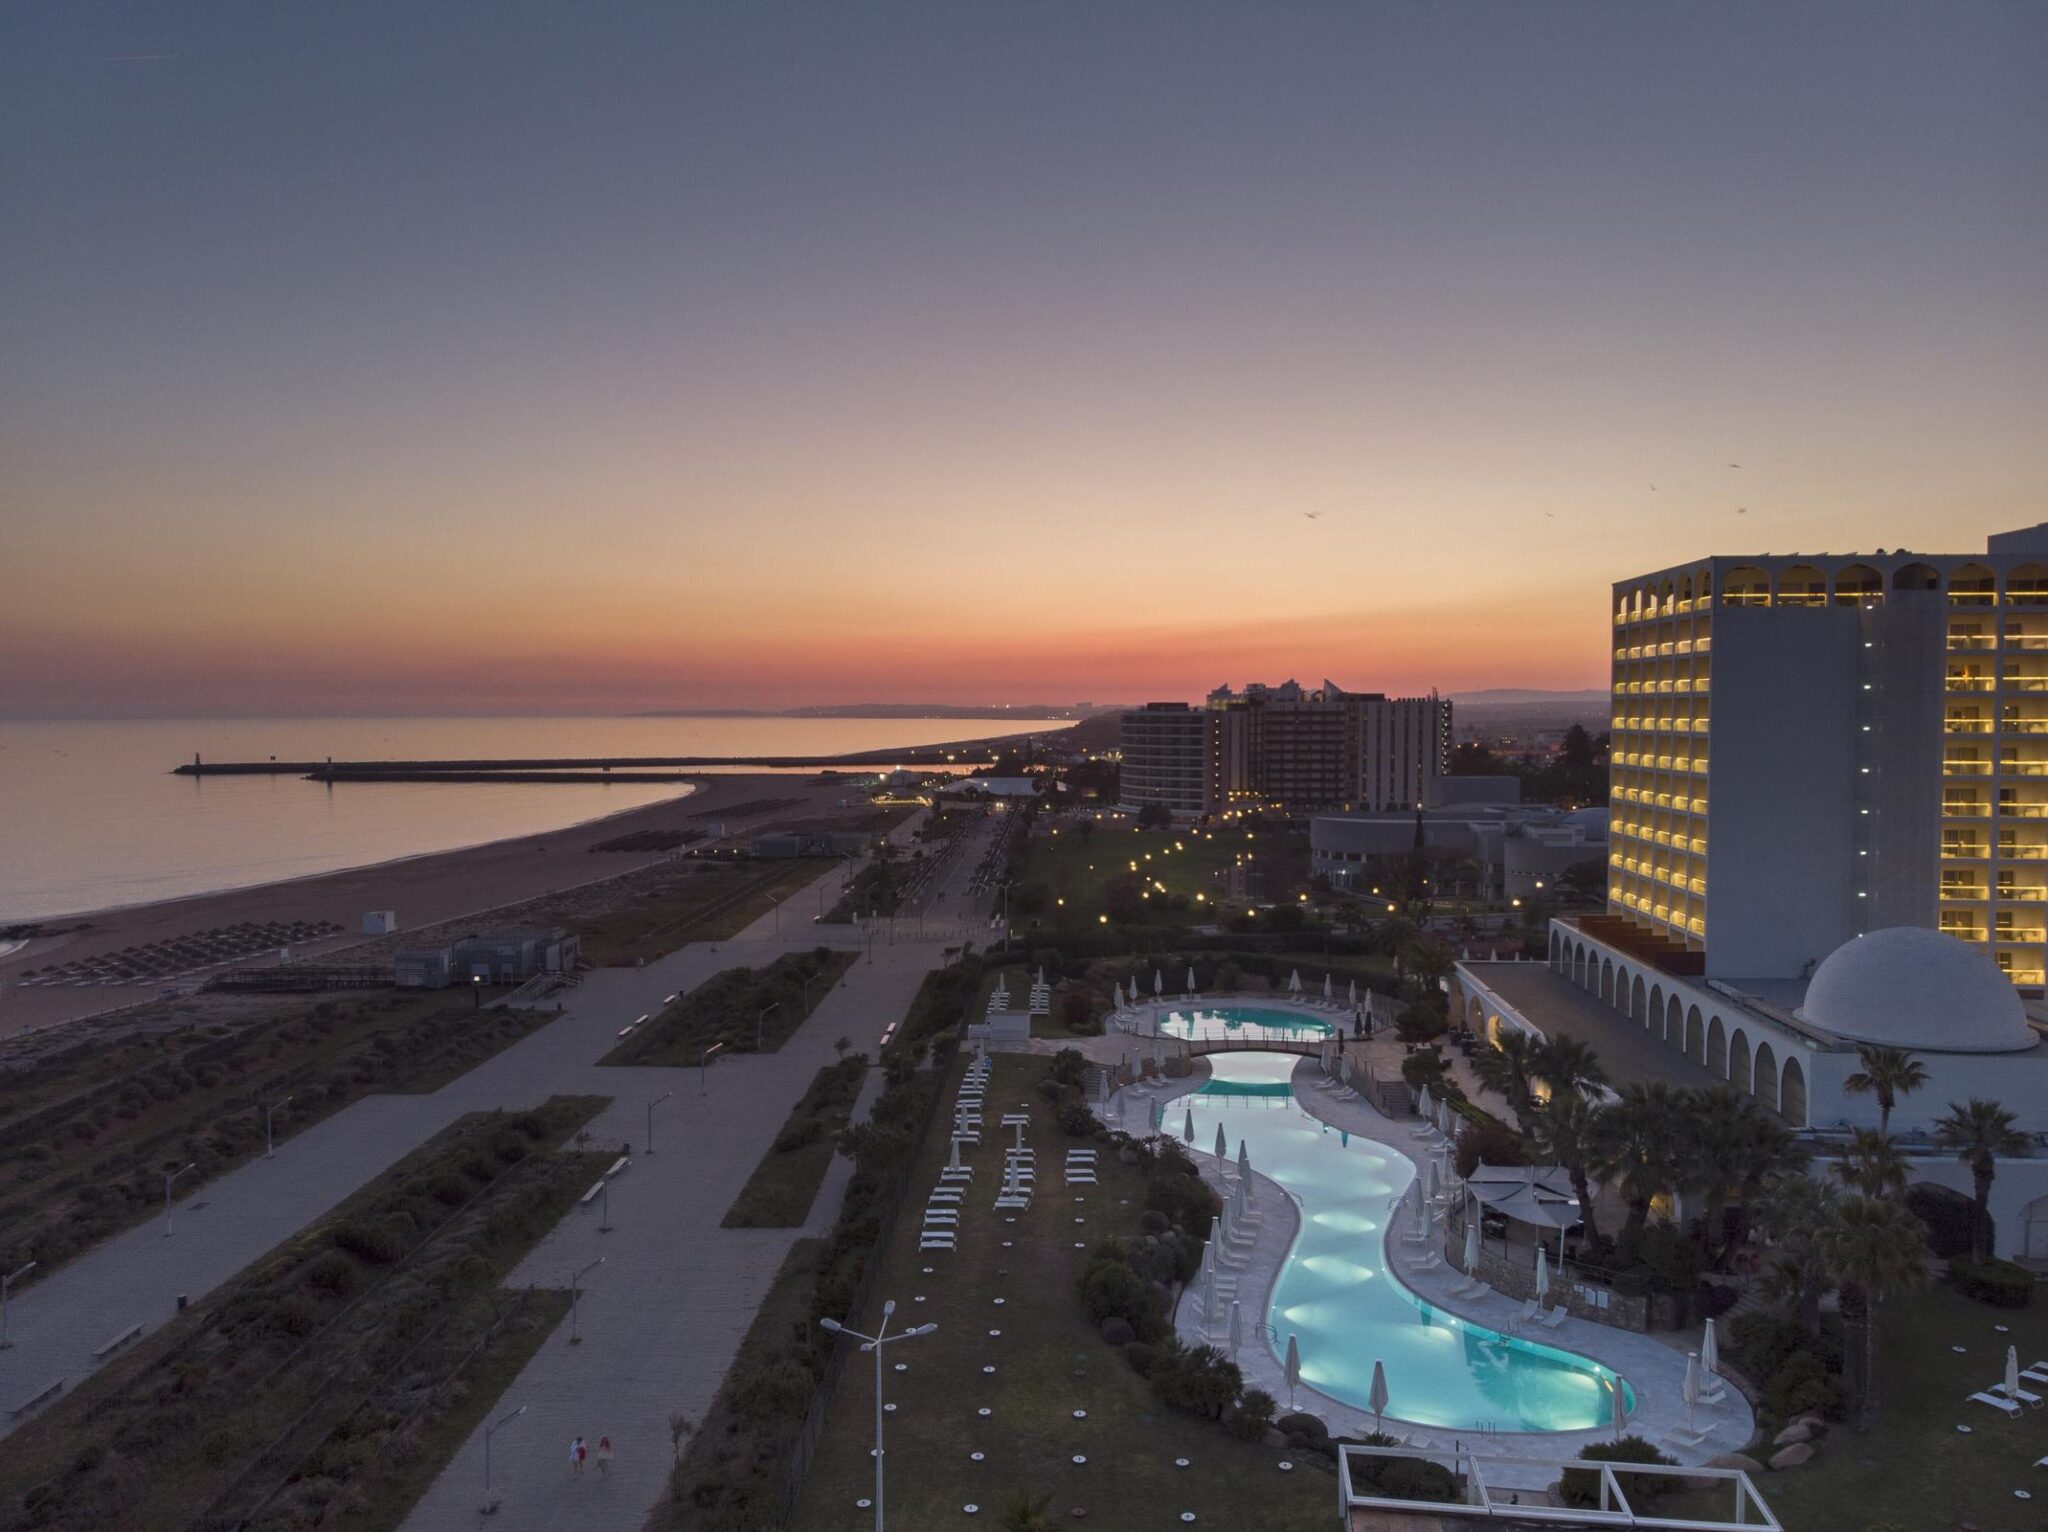 Sunset view at the Crowne Plaza Vilamoura.